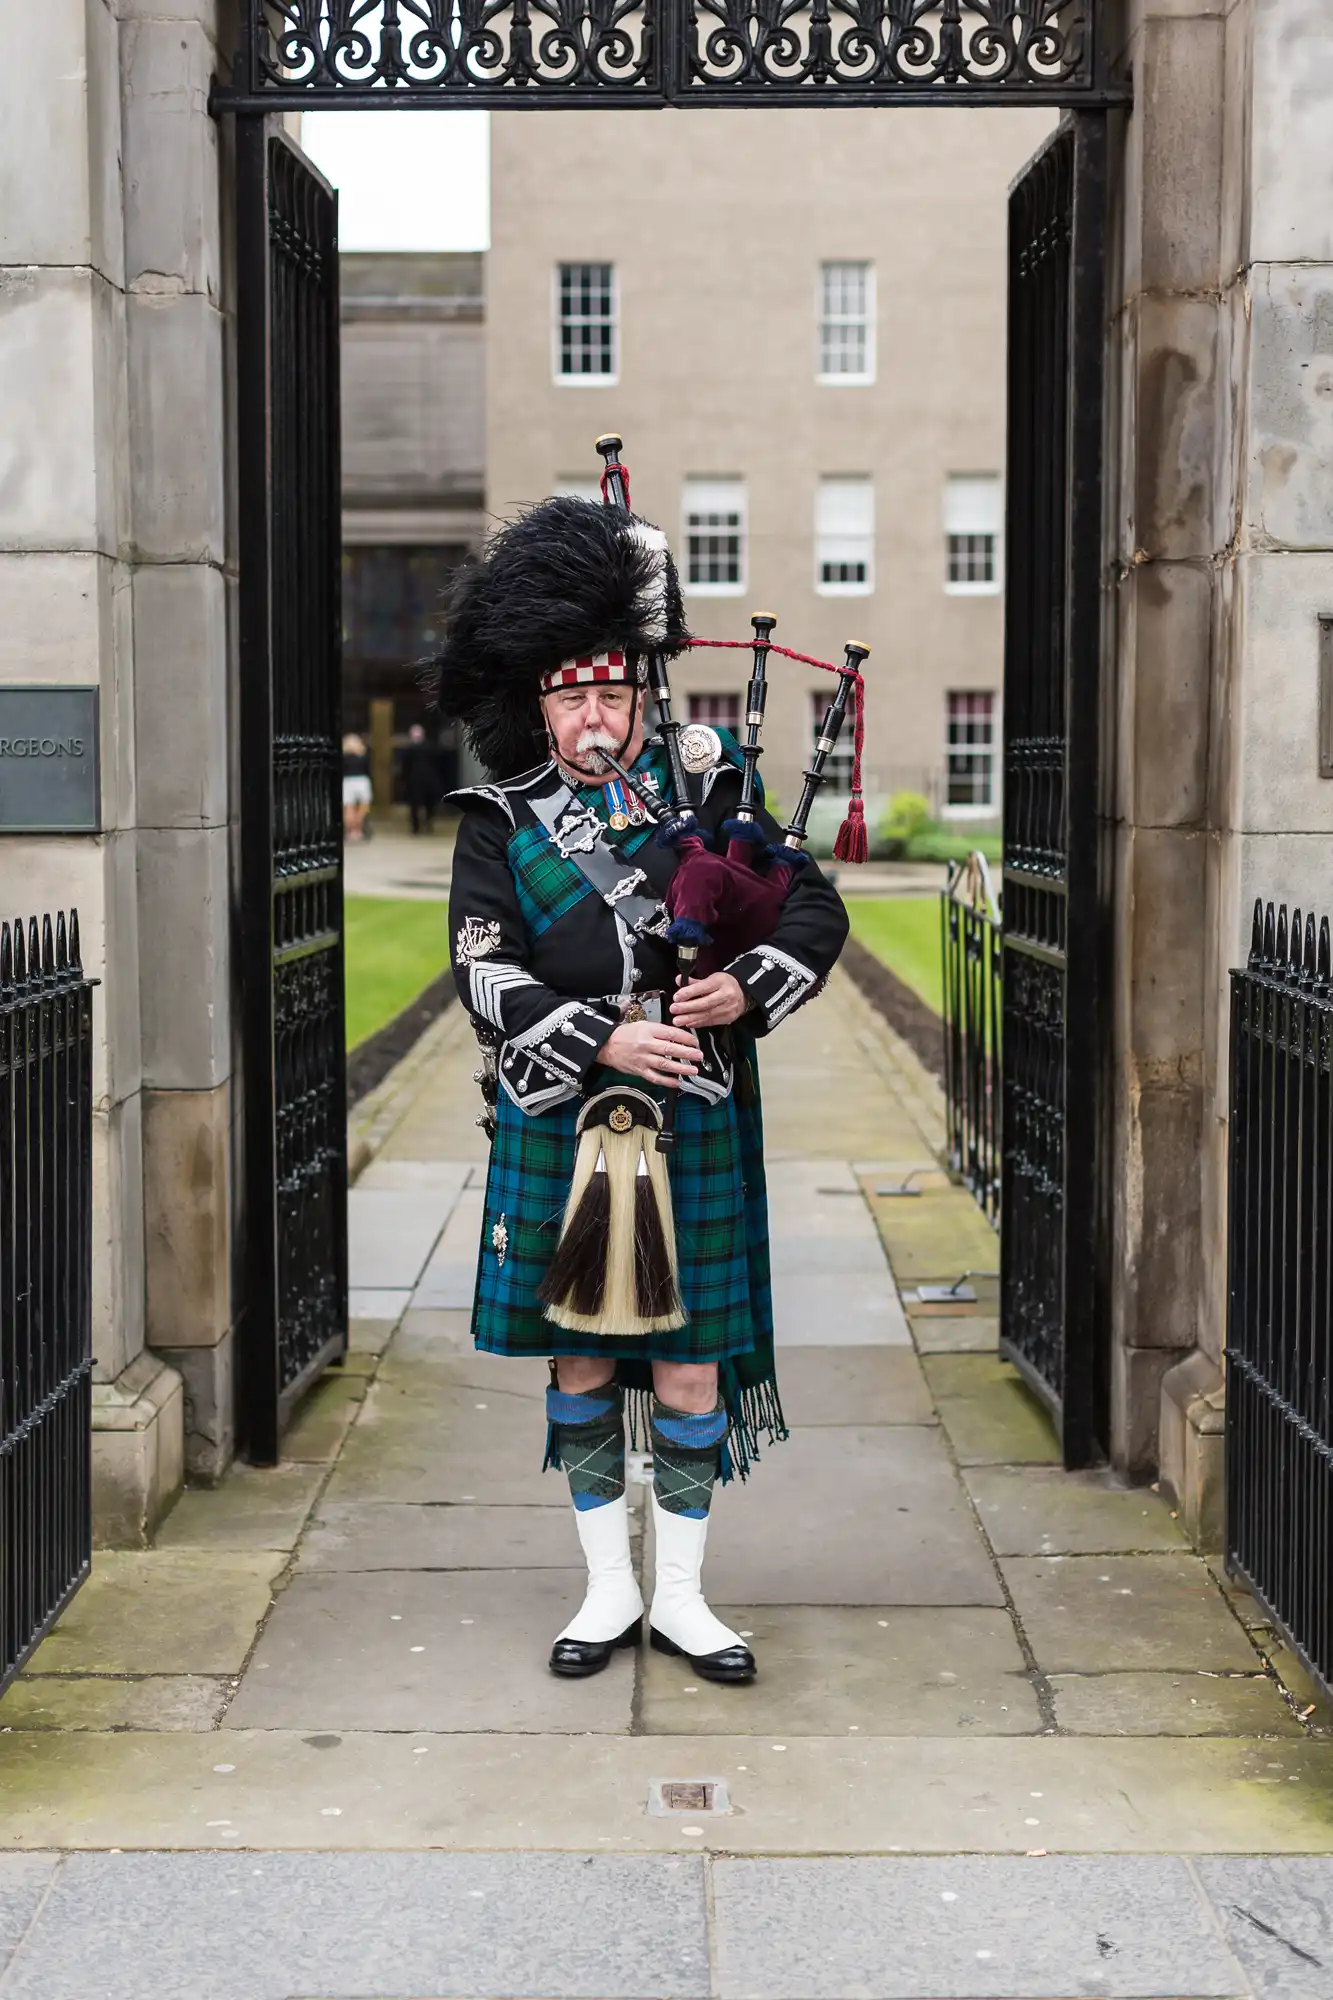 A bagpiper in traditional scottish attire, including a kilt and sporran, stands playing bagpipes at a gate entrance.